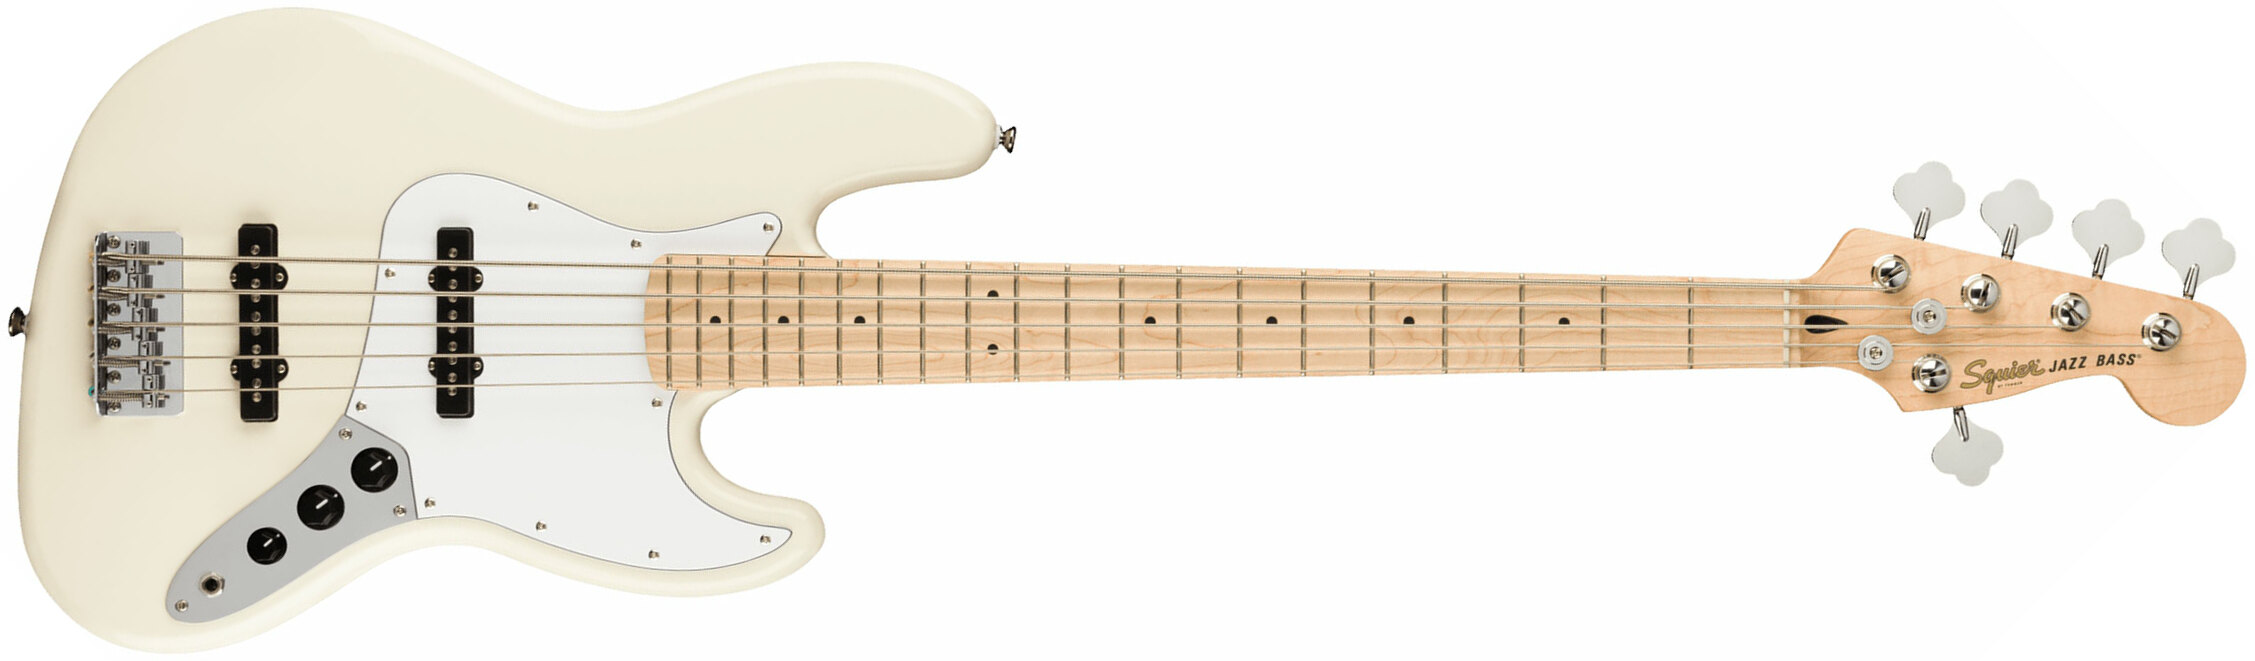 Squier Jazz Bass Affinity V 2021 5-cordes Mn - Olympic White - Solidbody E-bass - Main picture